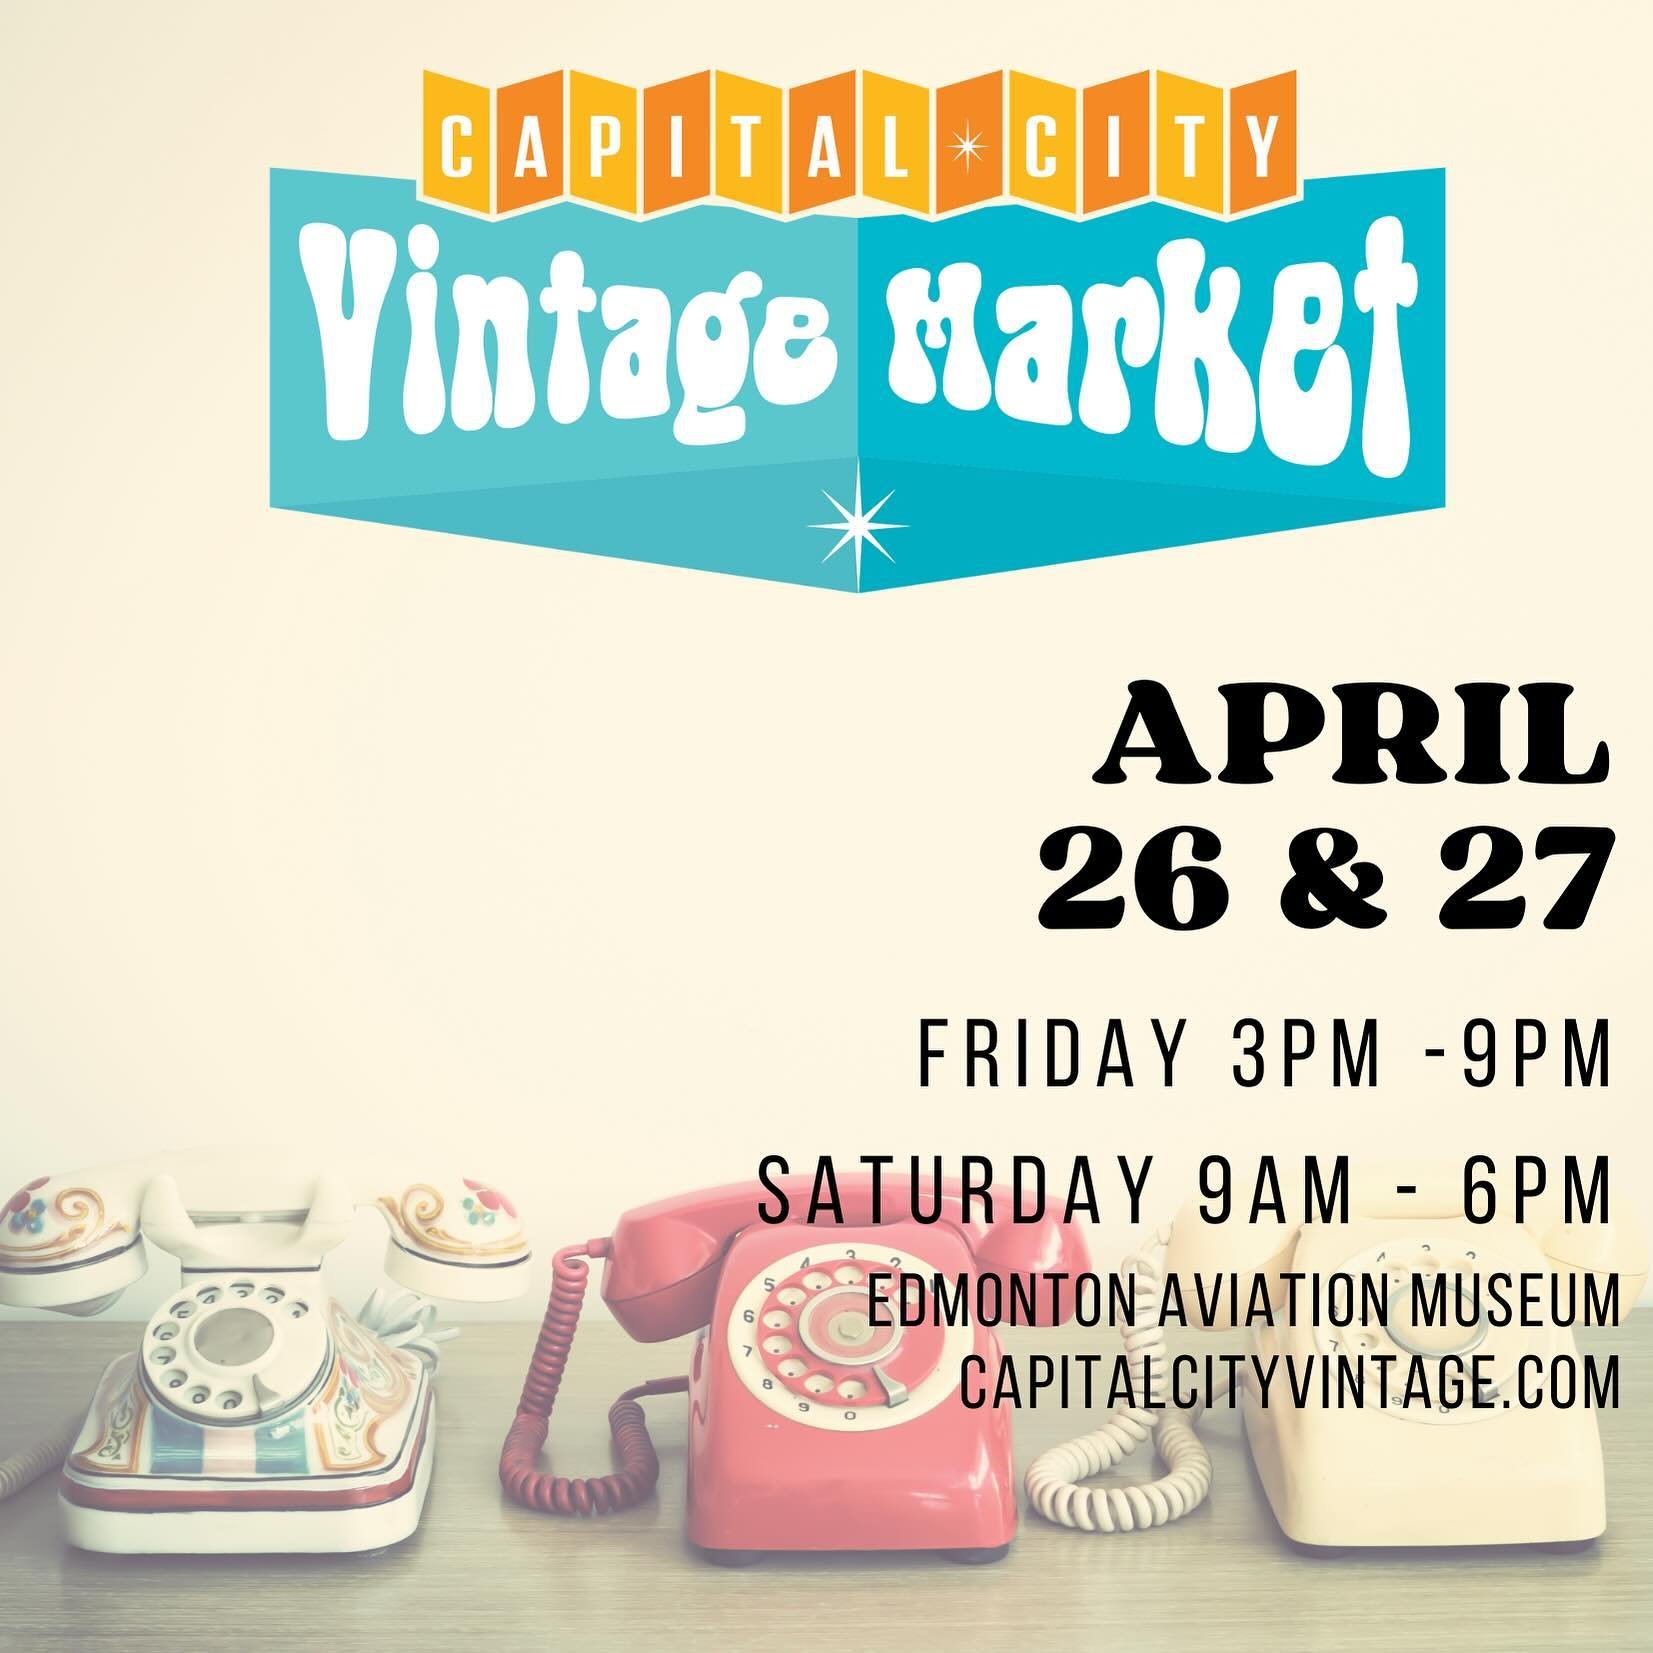 It&rsquo;s almost time!!

Be sure to check out the upcoming @vintage.yeg market on April 26 &amp; 27! We&rsquo;ll be there with a booth and a photo op! 📸